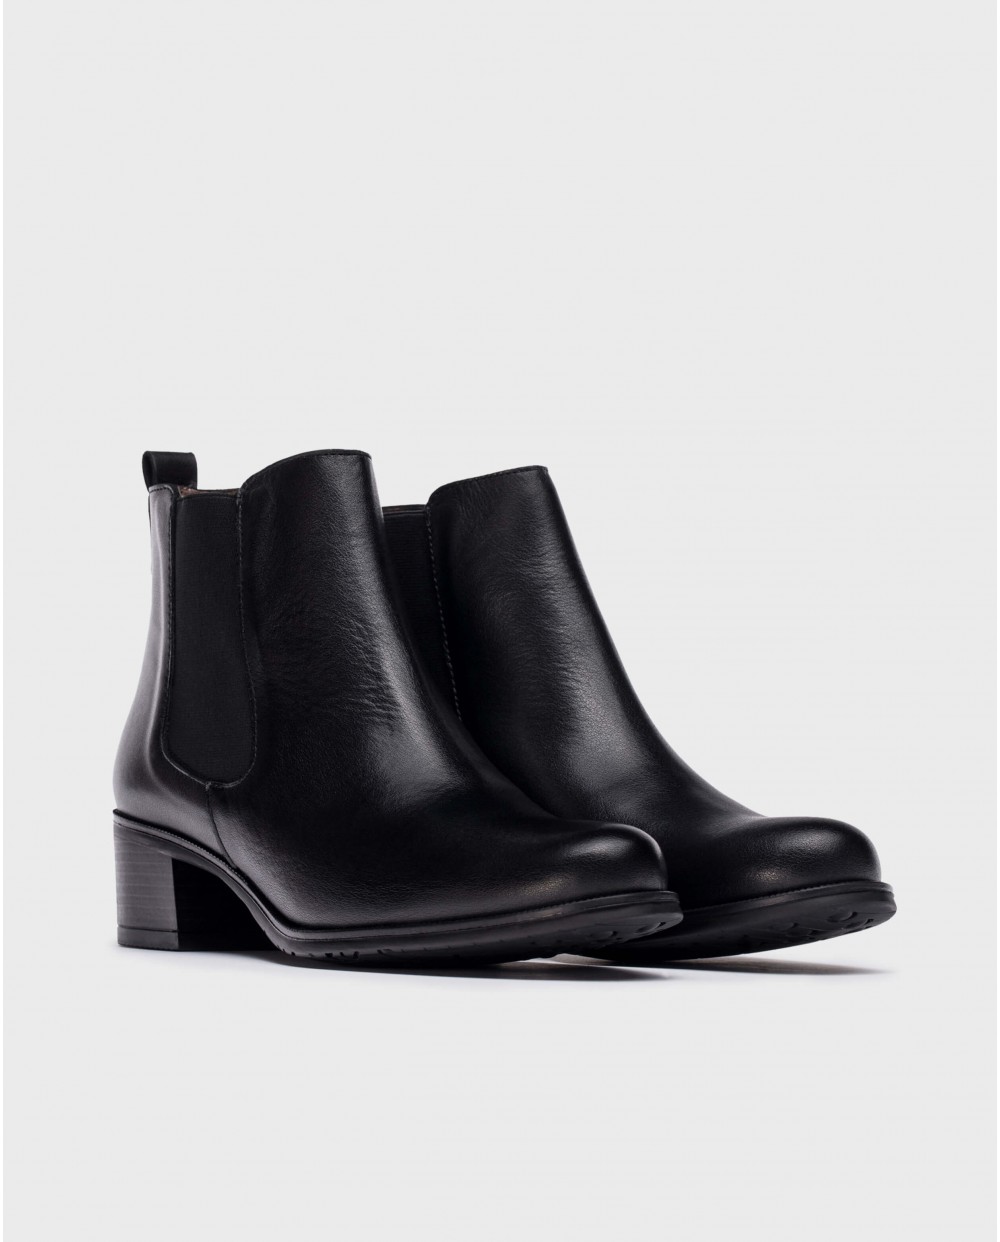 Wonders-Boots-Black Chelsea ankle boot